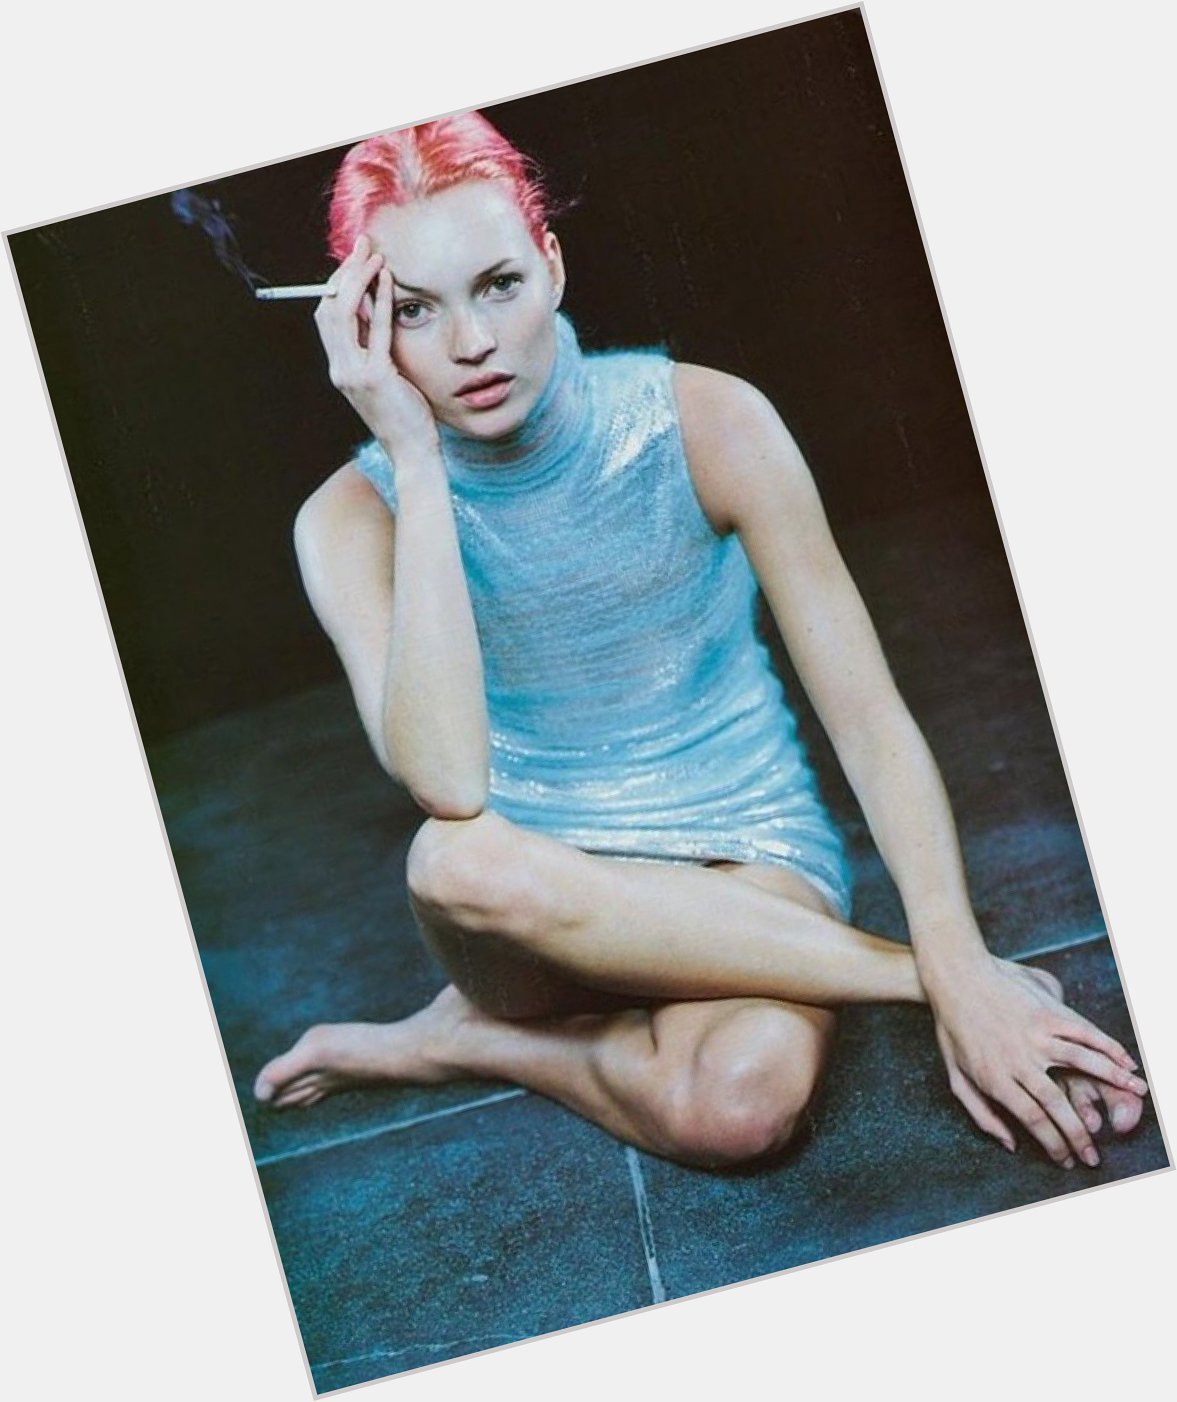 Happy birthday Kate Moss! Here giving a masterclass in pink hair, in a 1998 shoot by Juergen Teller for Vogue. 